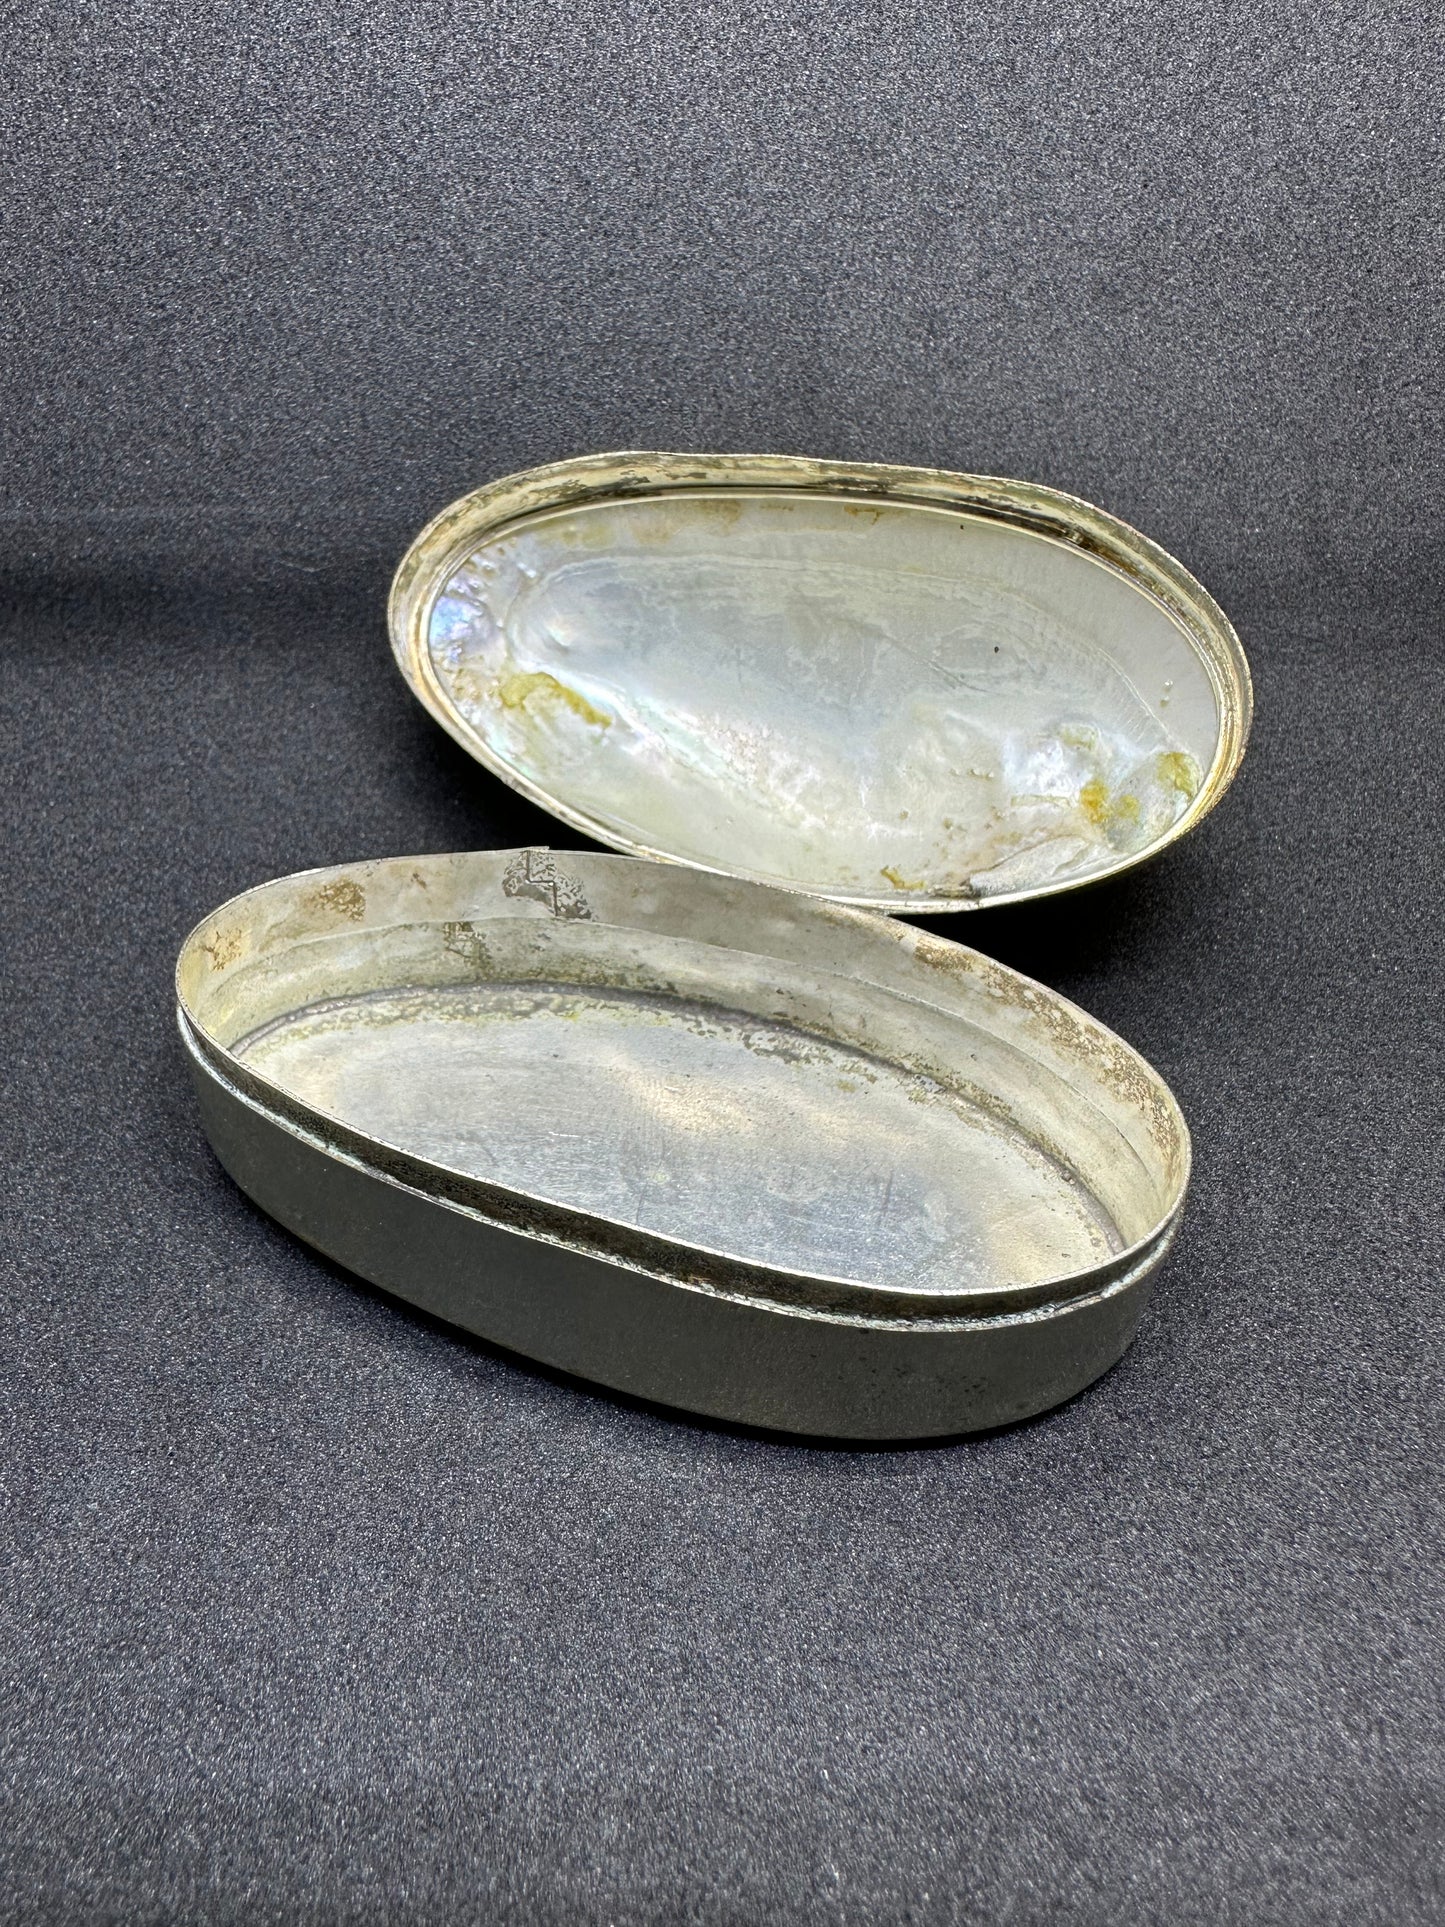 Vintage Sterling Silver Genuine White Iridescent Clam Shell Hinged Trinket Box